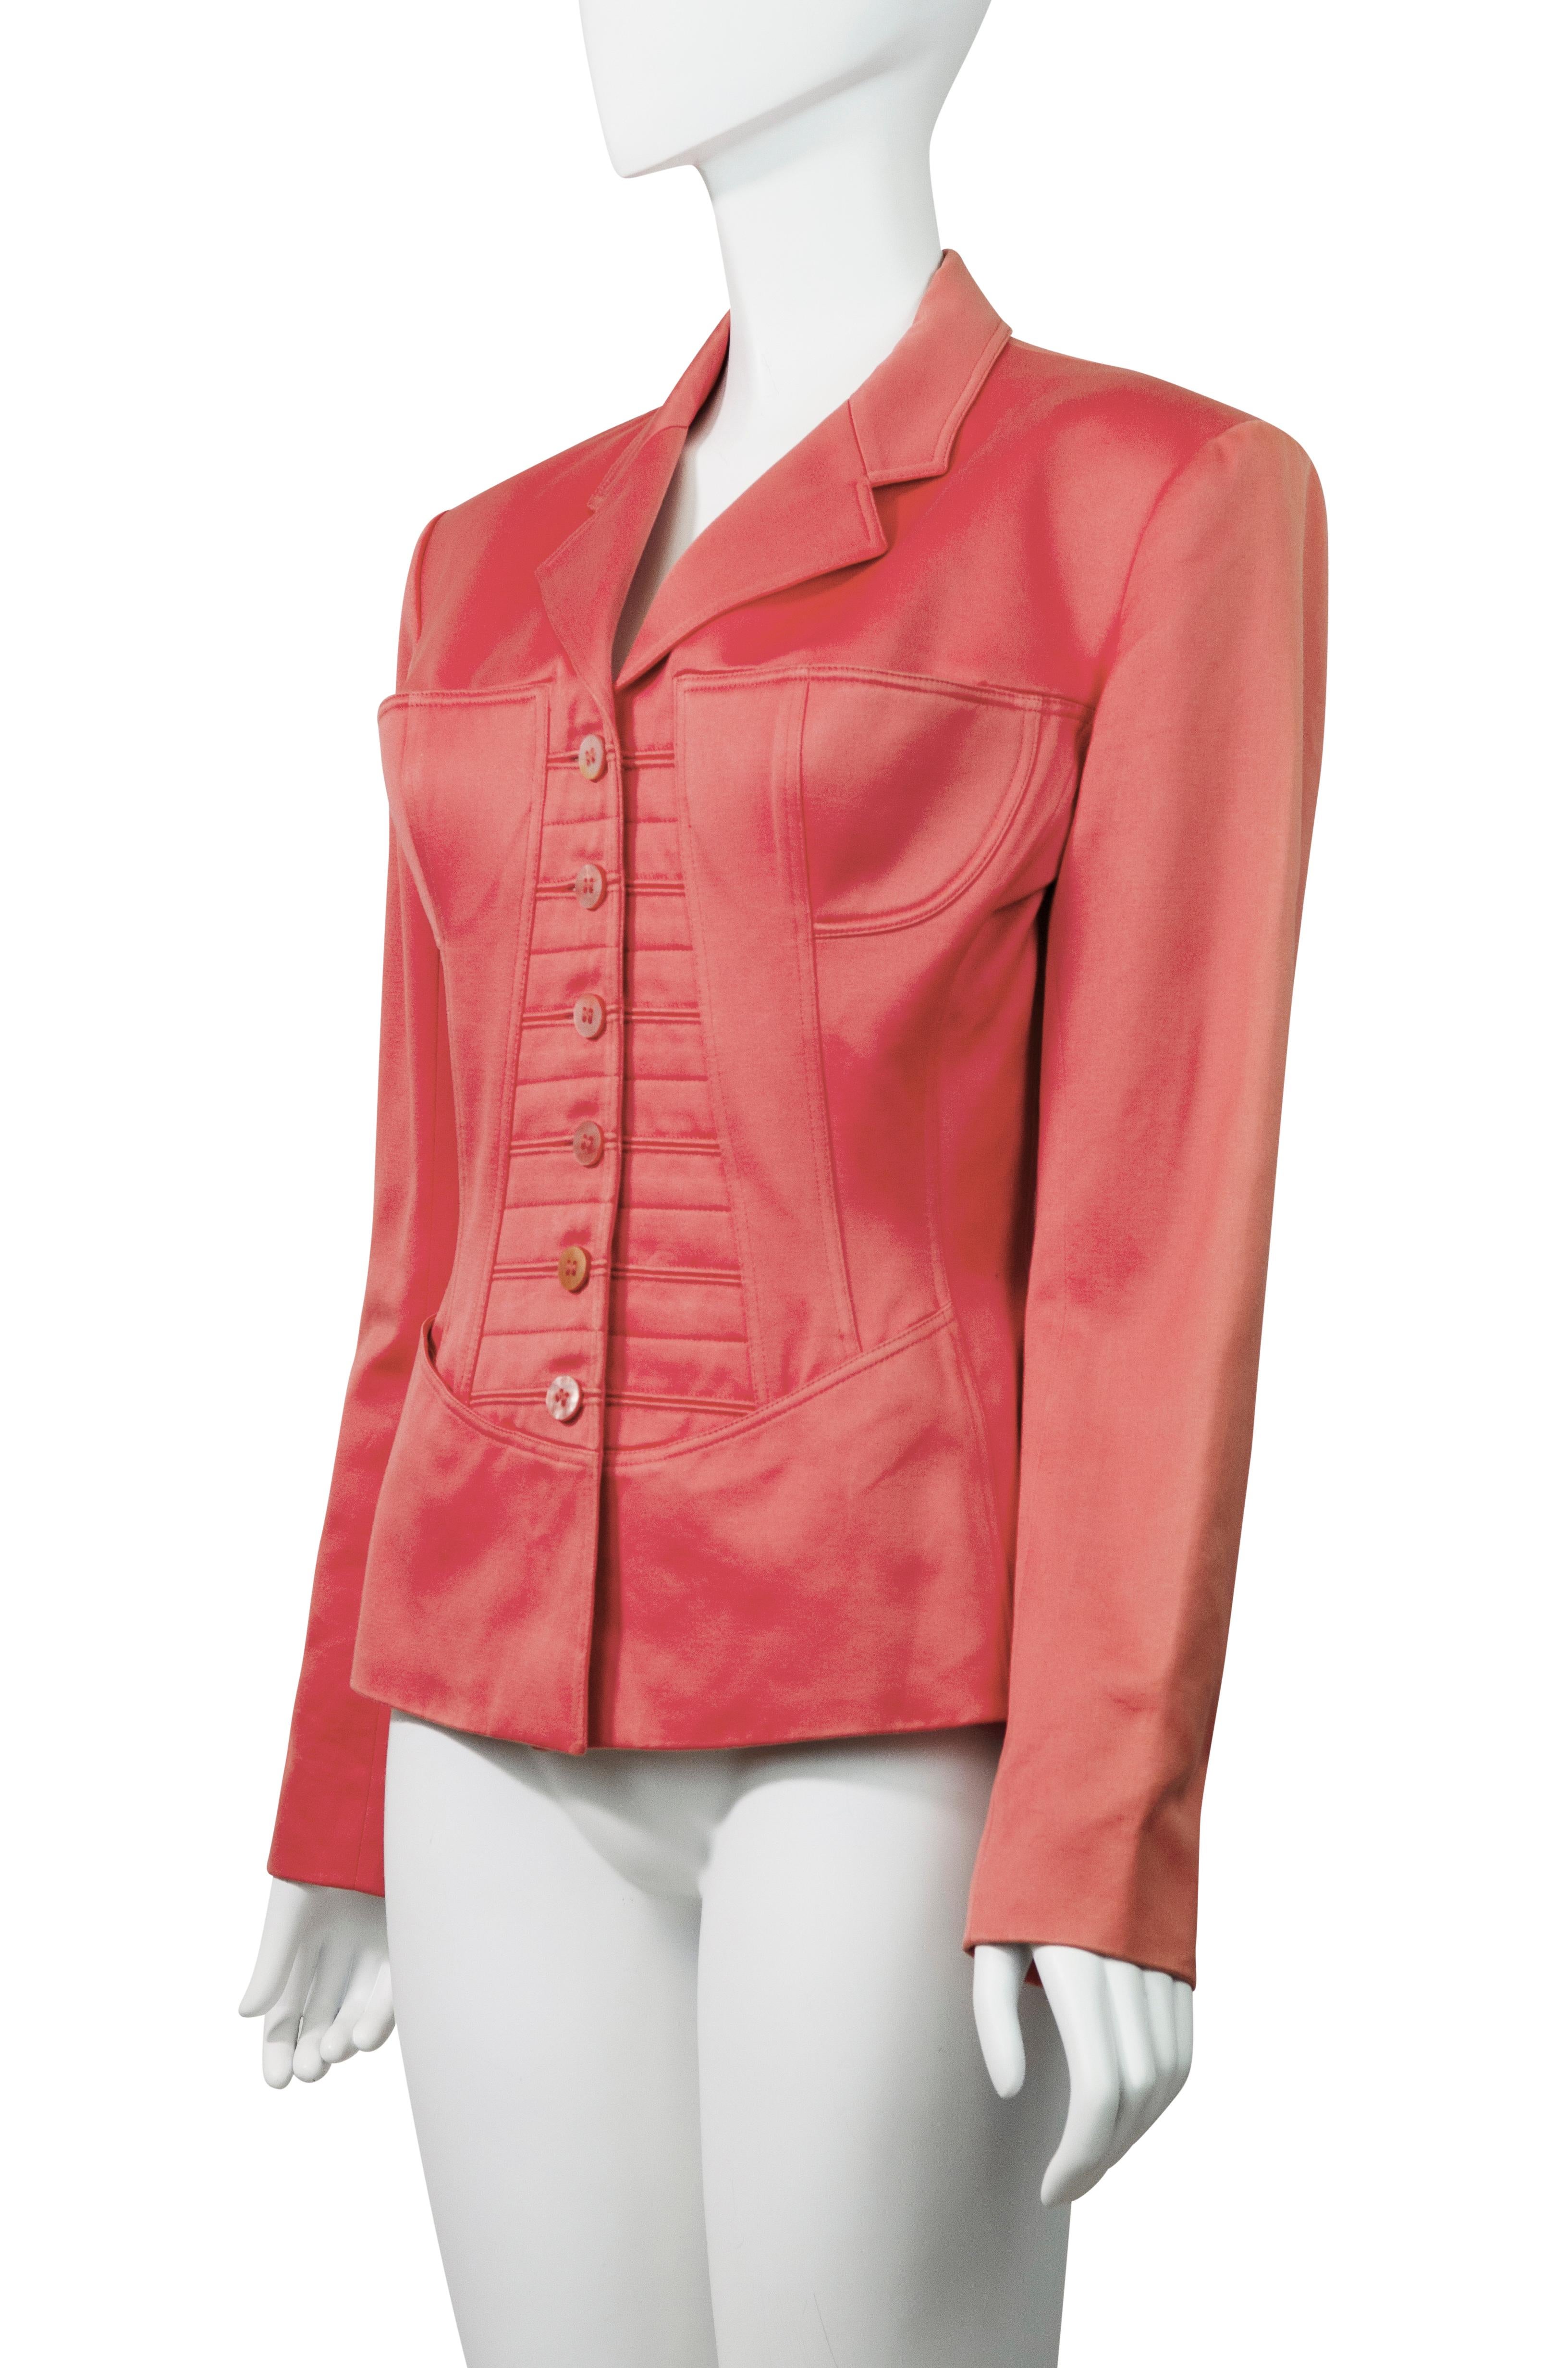 Azzedine Alaïa Vintage S/S 1992 Runway Coral Corset Jacket Documented   In Excellent Condition For Sale In Berlin, BE